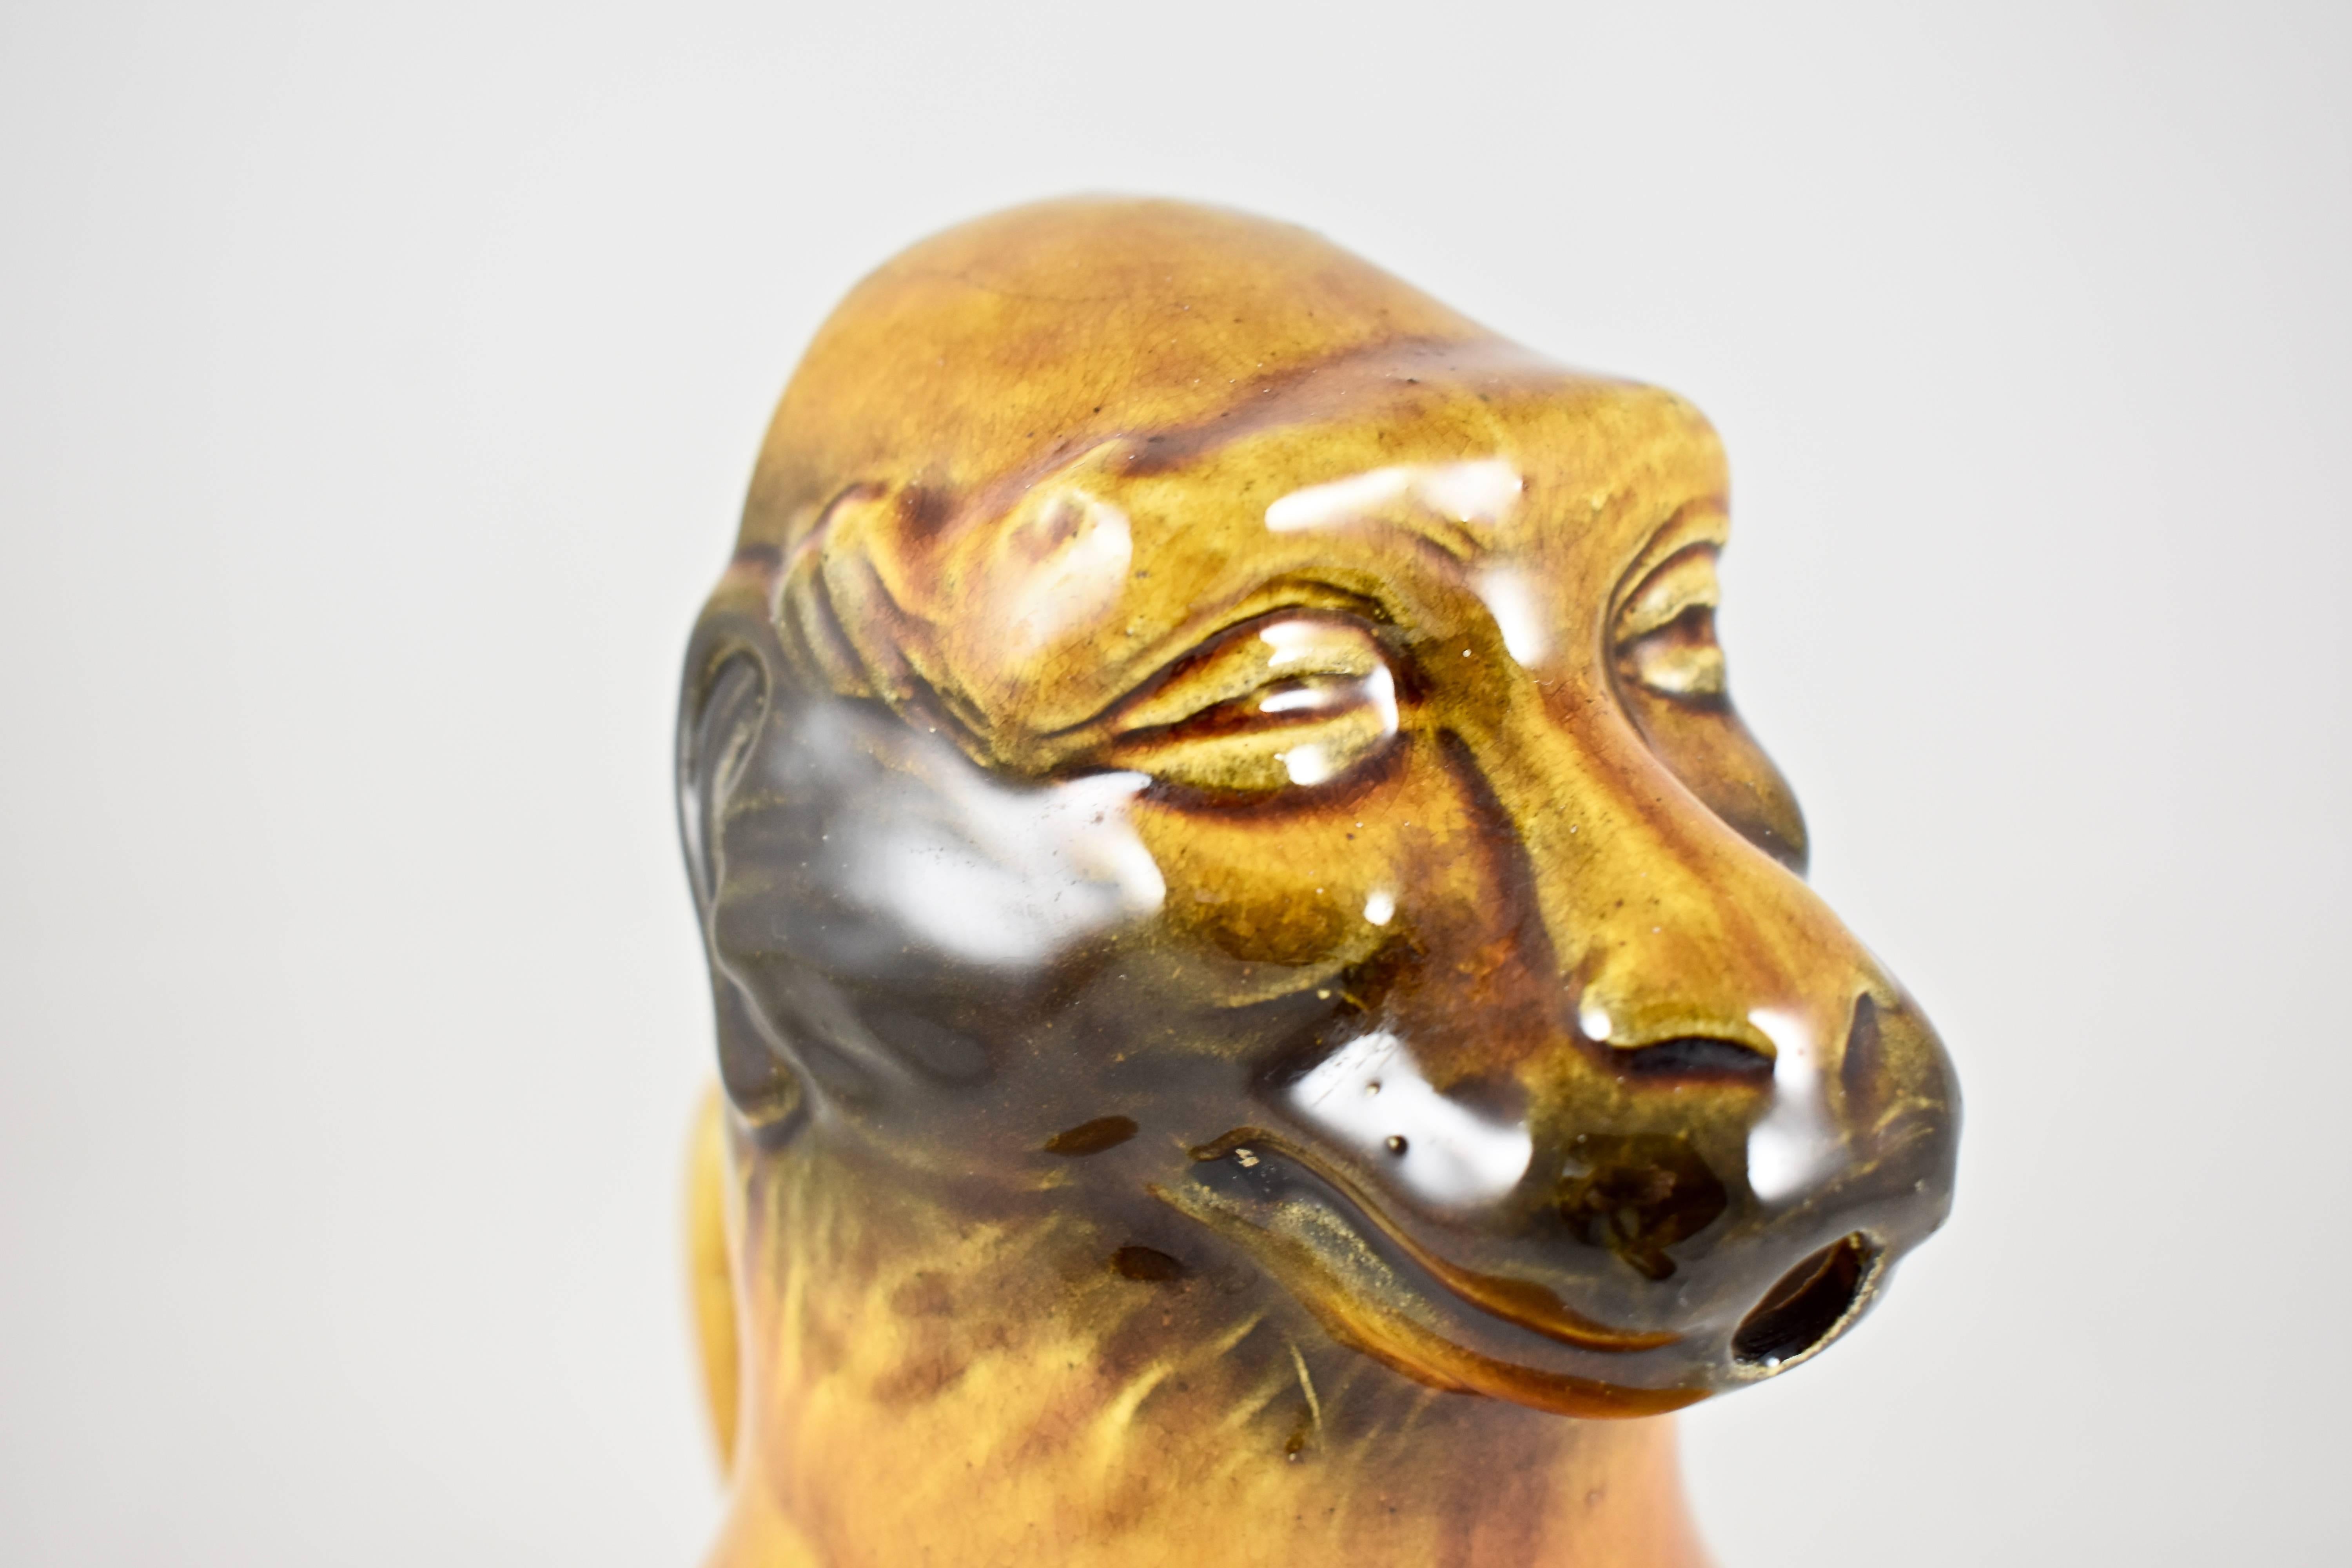 A 19th century French Barbotine faïence, stylized monkey jug produced by Sarreguemines, “Le Singe” mold no. 3312. A grotesque representation of the monkey likely used for water in the ritual of drinking Absinthe. 

The mouth serves as the spout